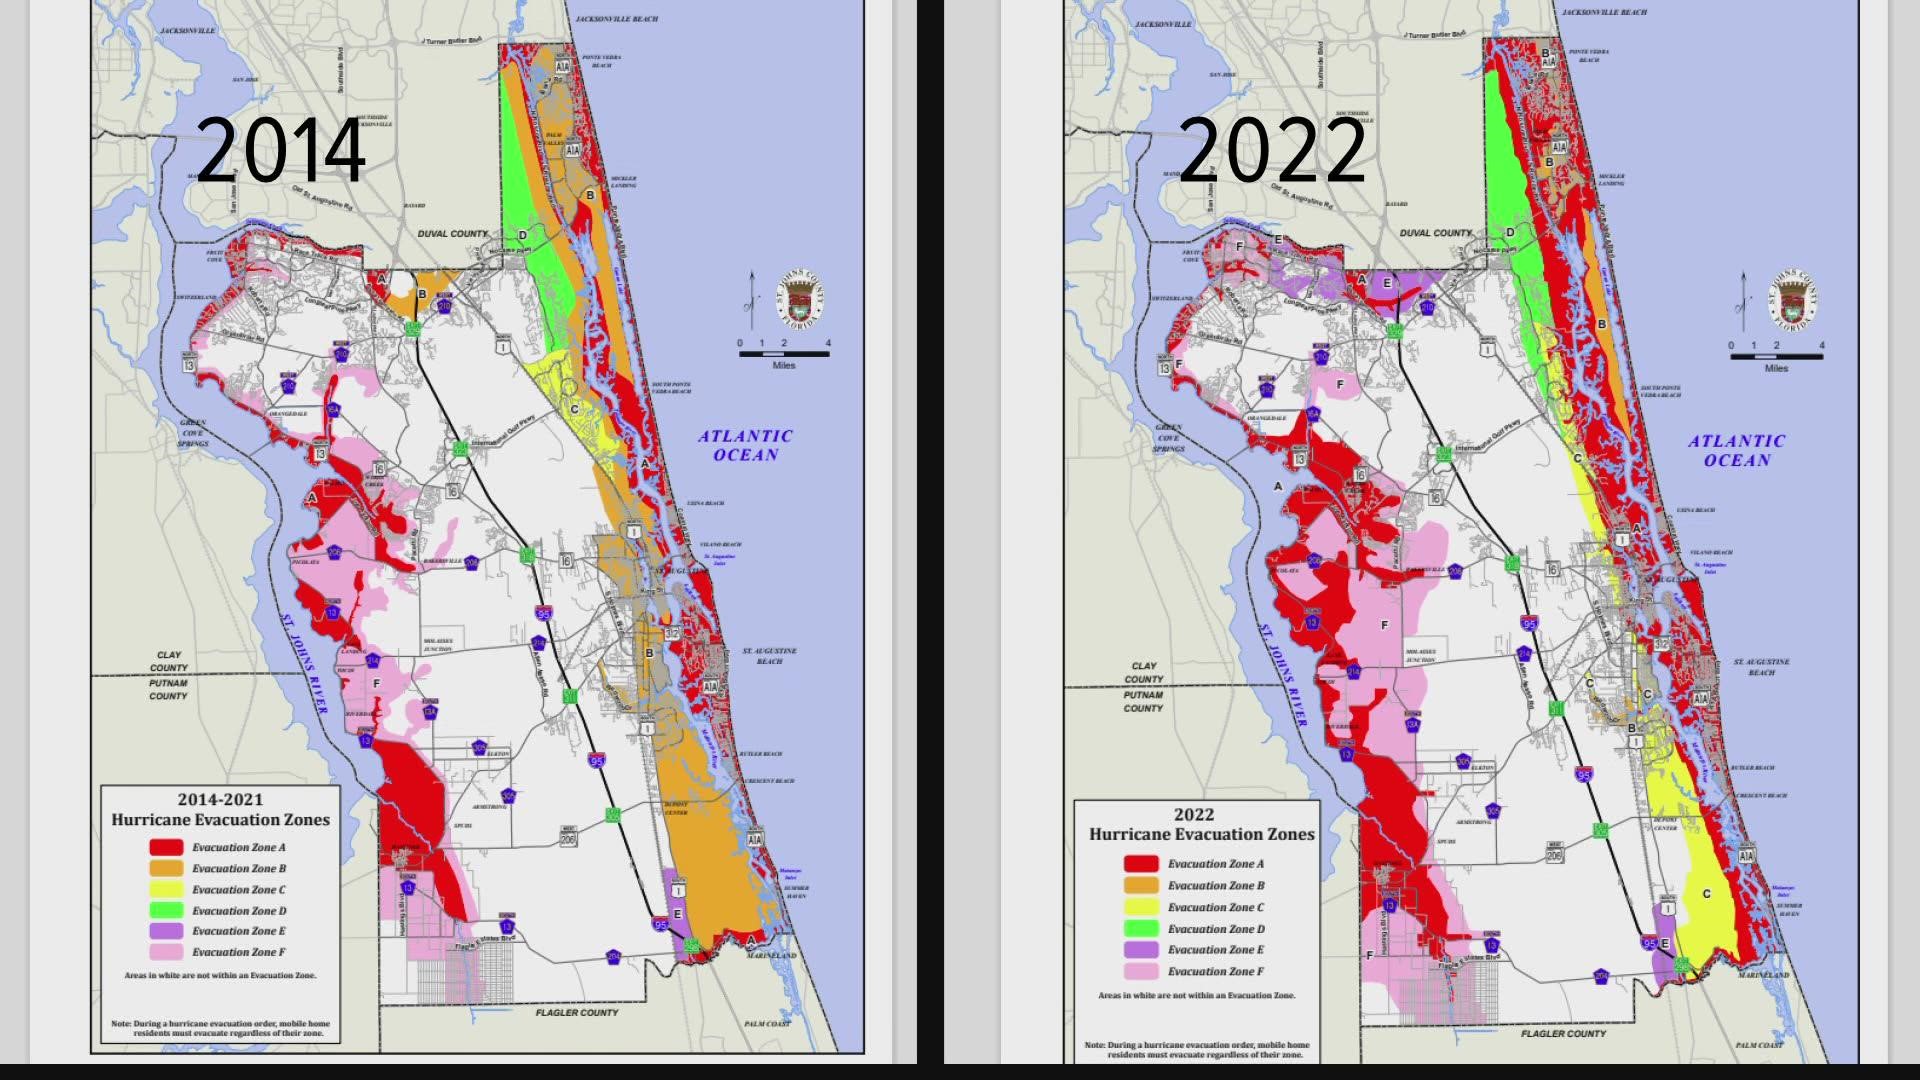 You may not have been in an evacuation zone before, but you could be now. St. Johns County has altered it hurricane evacuation zone map.